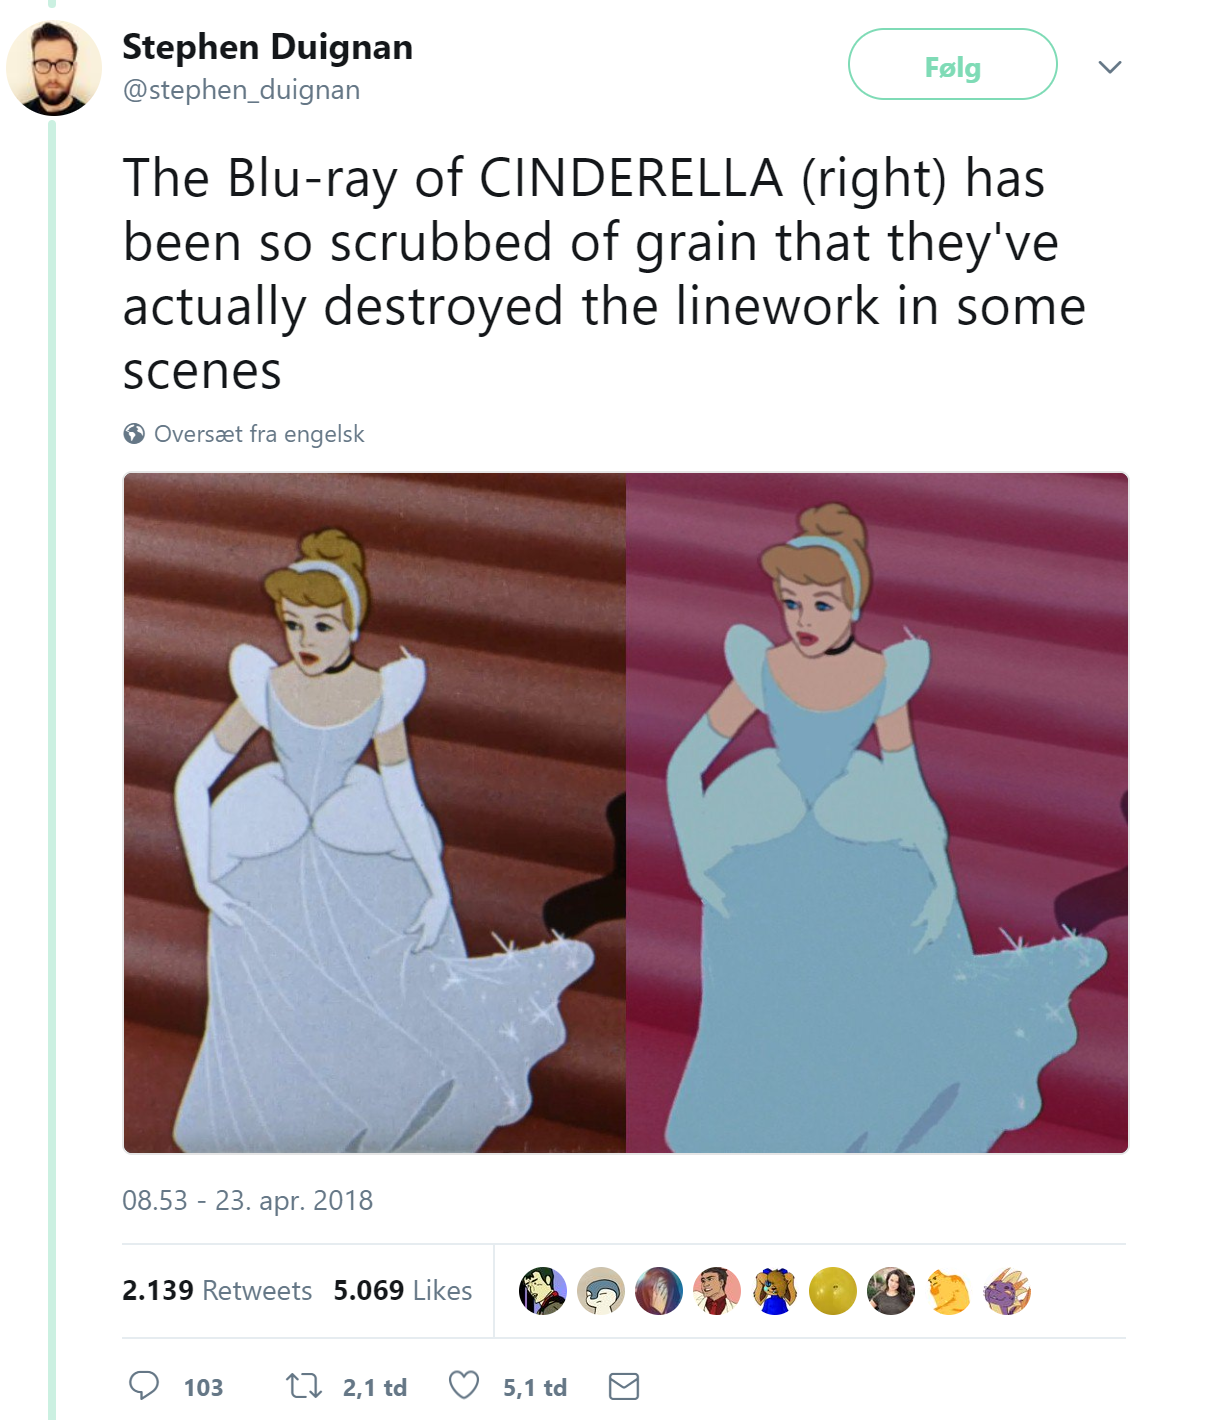 blu ray cinderella linework - Stephen Duignan stephen_duignan Poly The Bluray of Cinderella right has been so scrubbed of grain that they've actually destroyed the linework in some scenes Overset fra engelsk 08.53 23. apr. 2018 2.139 5.069 103 17 2.10 900